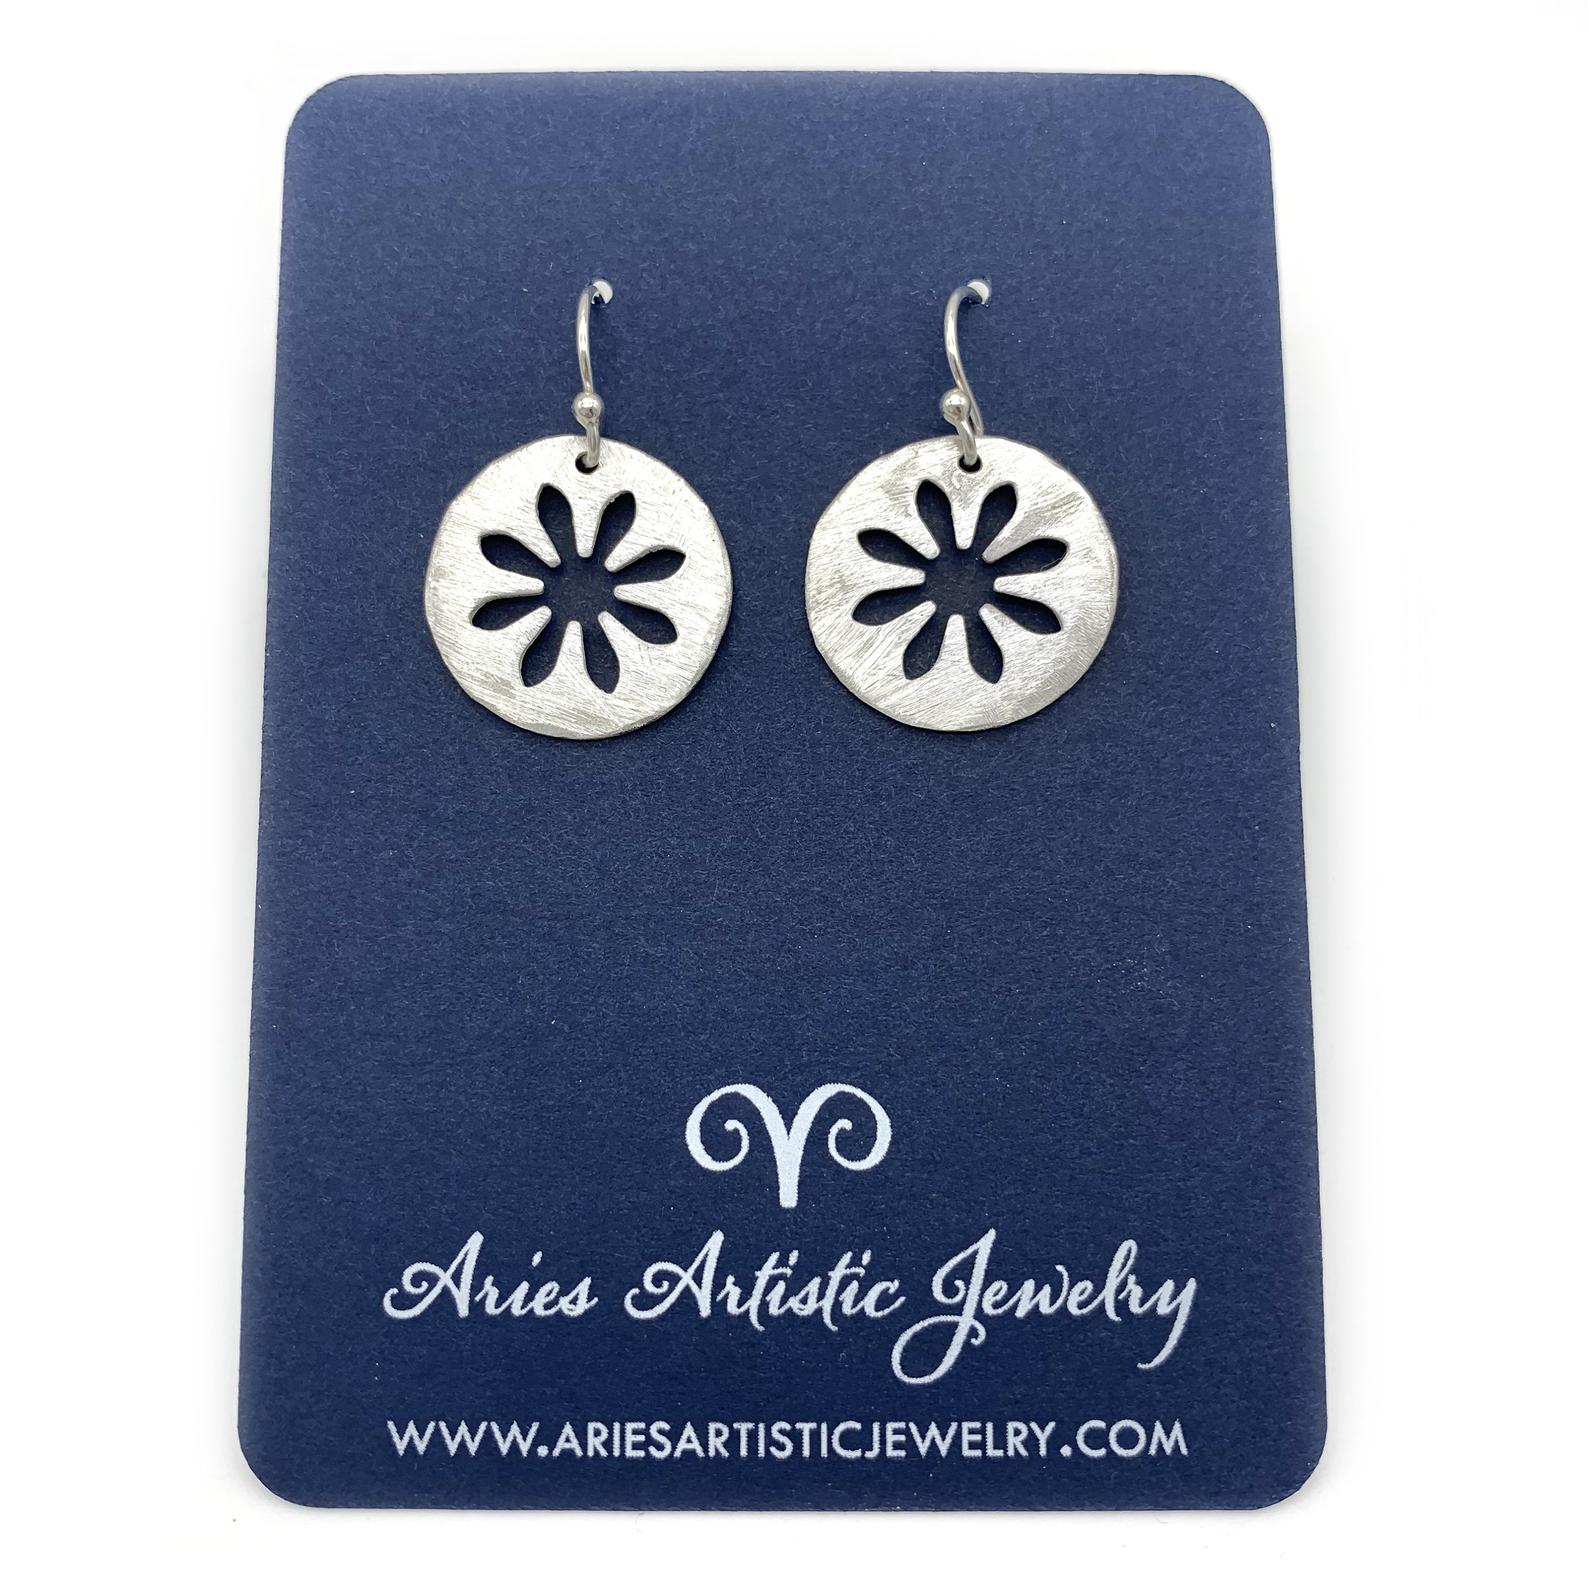 Round Snowflake Earrings with Abstract Design